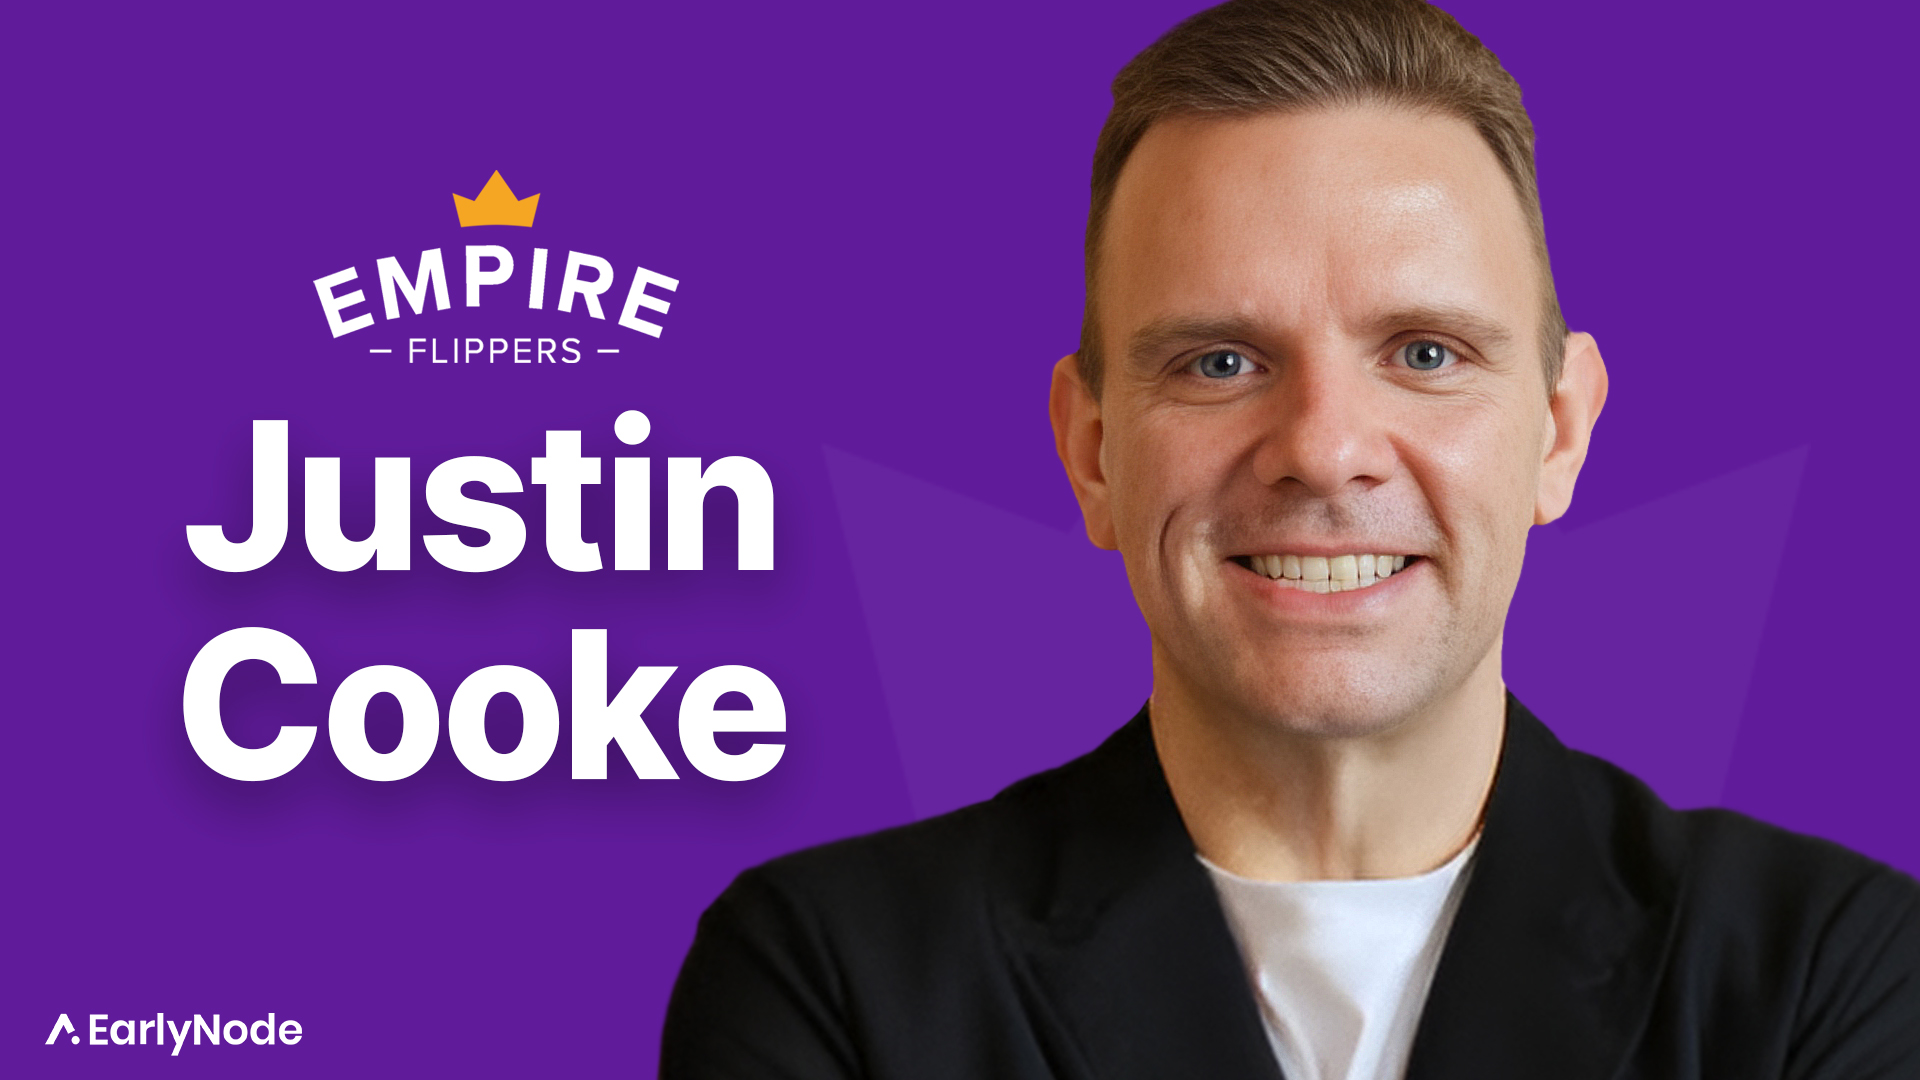 $500M of businesses sold, scaling advice, & acquisitions with Justin Cooke, founder of Empire Flippers